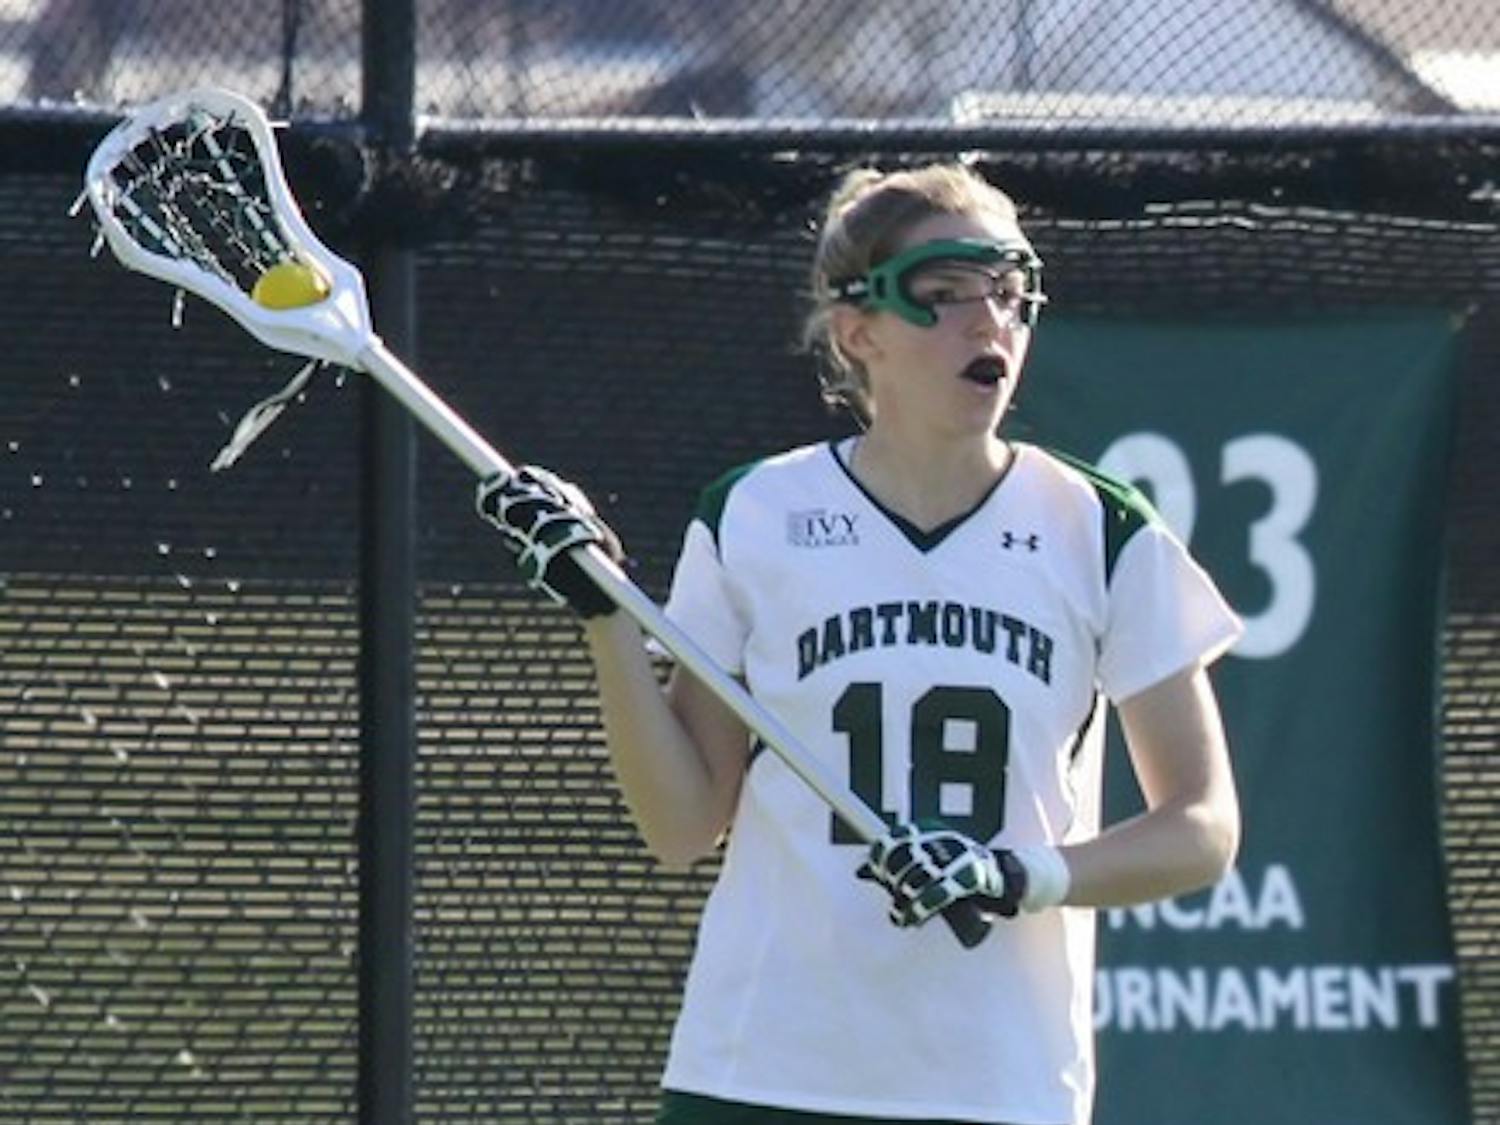 Co-captain Katherine Chiusano '09 had an assist in the Big Green's final game of the season against Duke on Sunday.